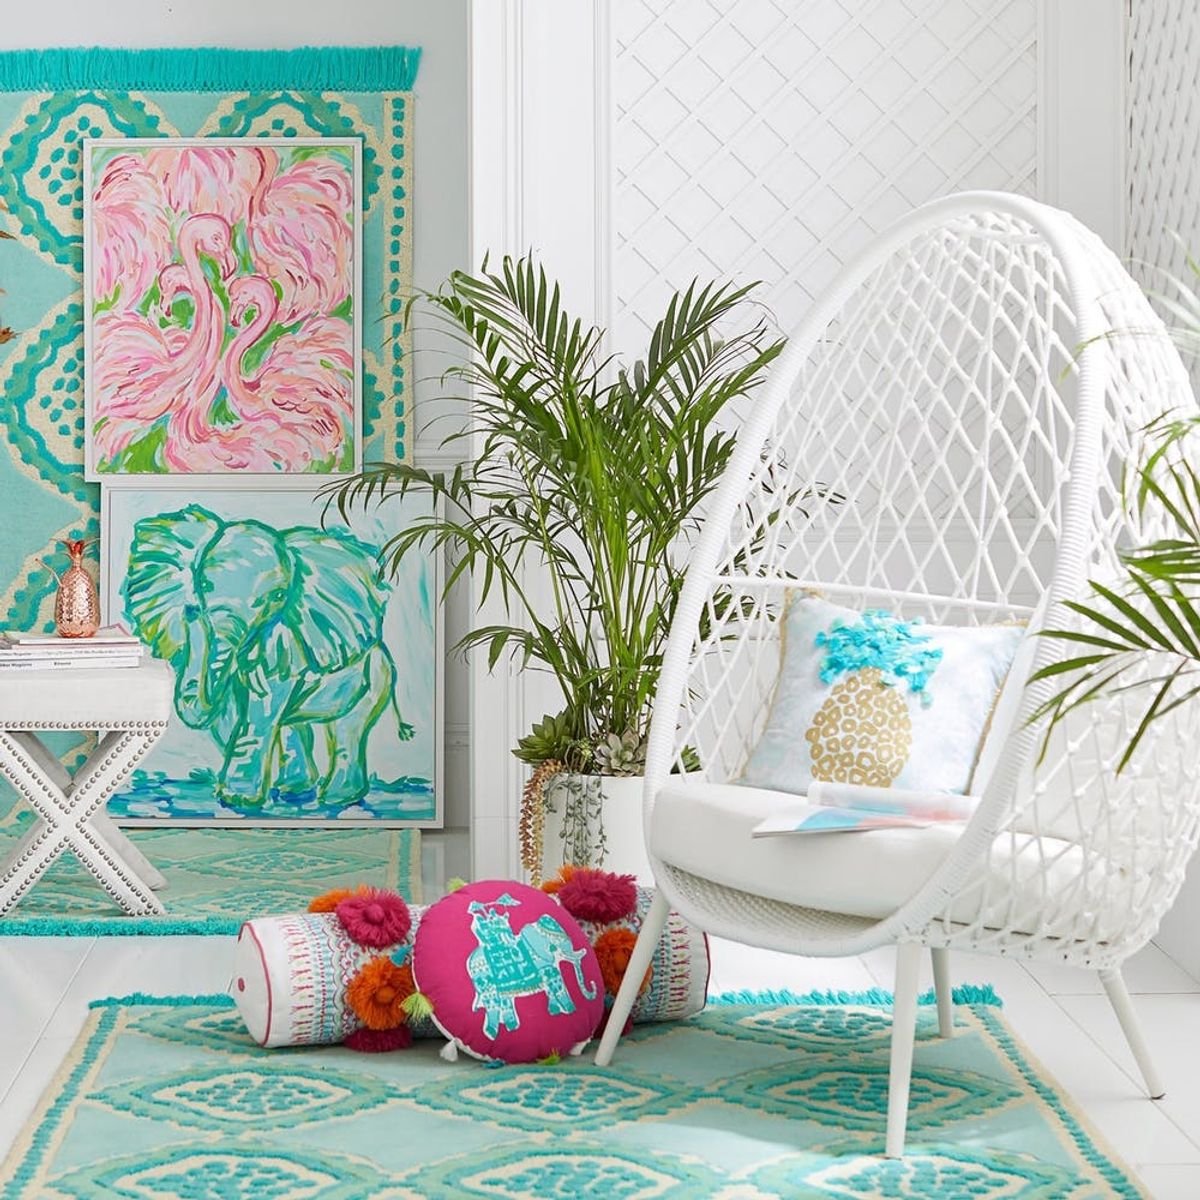 Pottery Barn’s New Collection with Lilly Pulitzer Is HERE